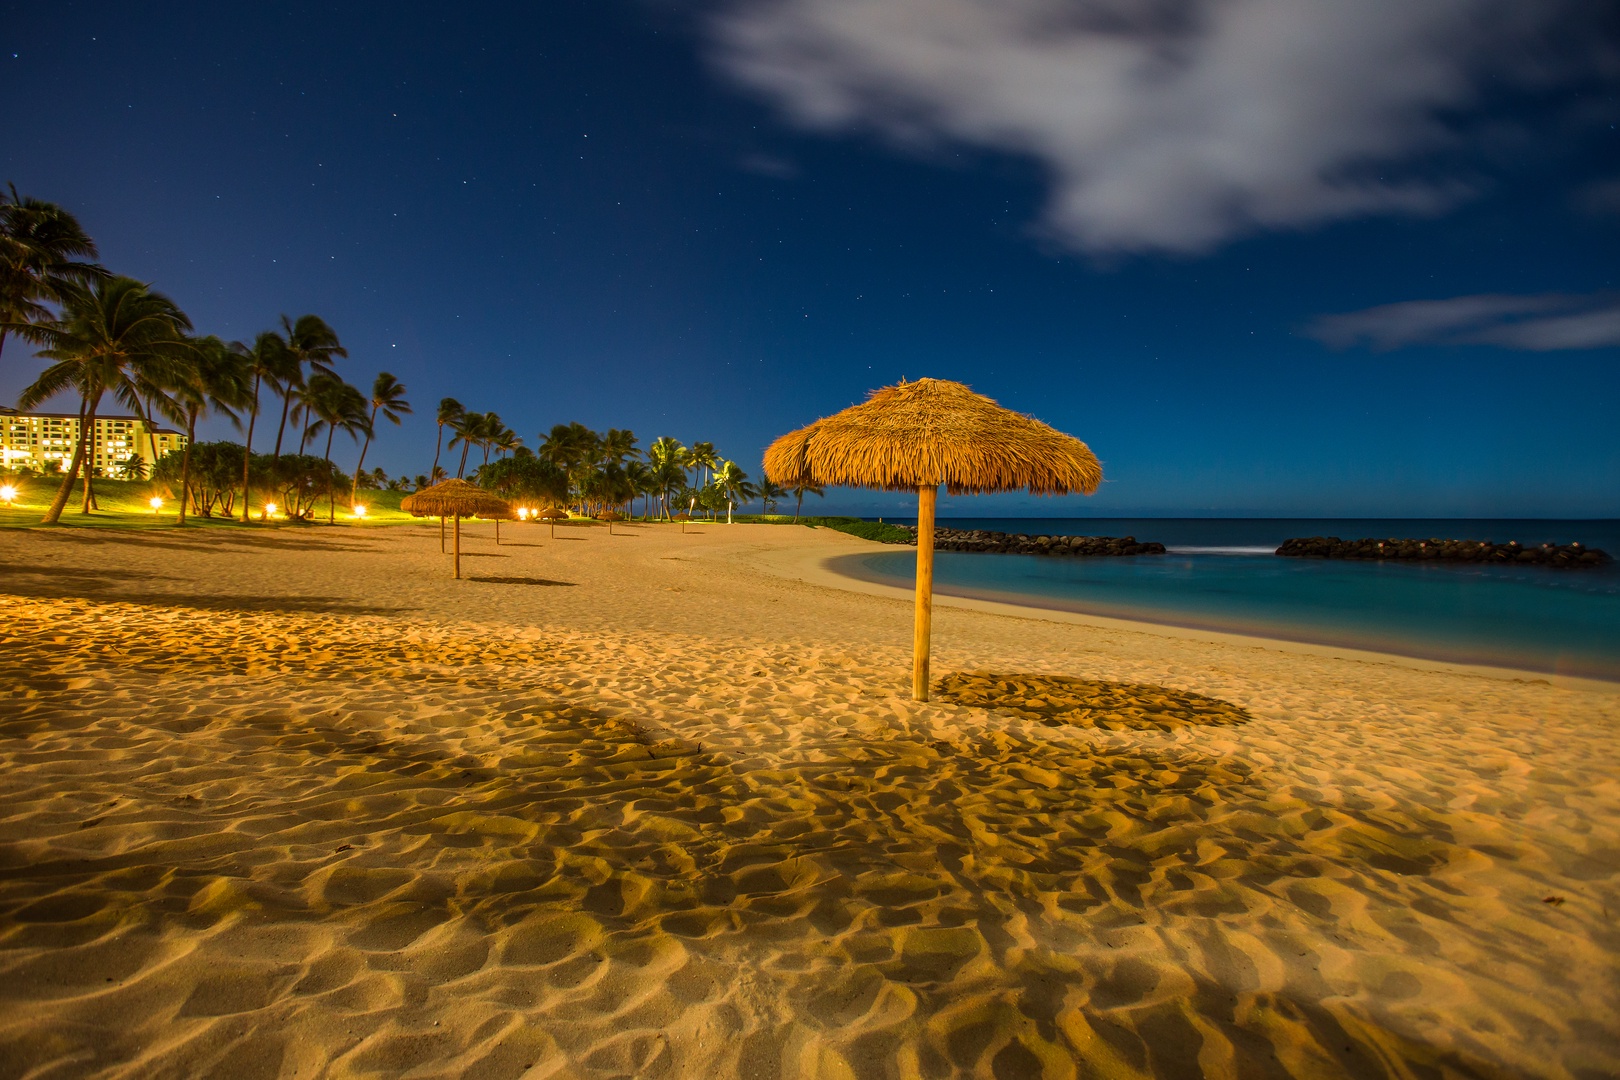 Kapolei Vacation Rentals, Coconut Plantation 1080-1 - Take an evening stroll along the sandy beaches of the lagoon.